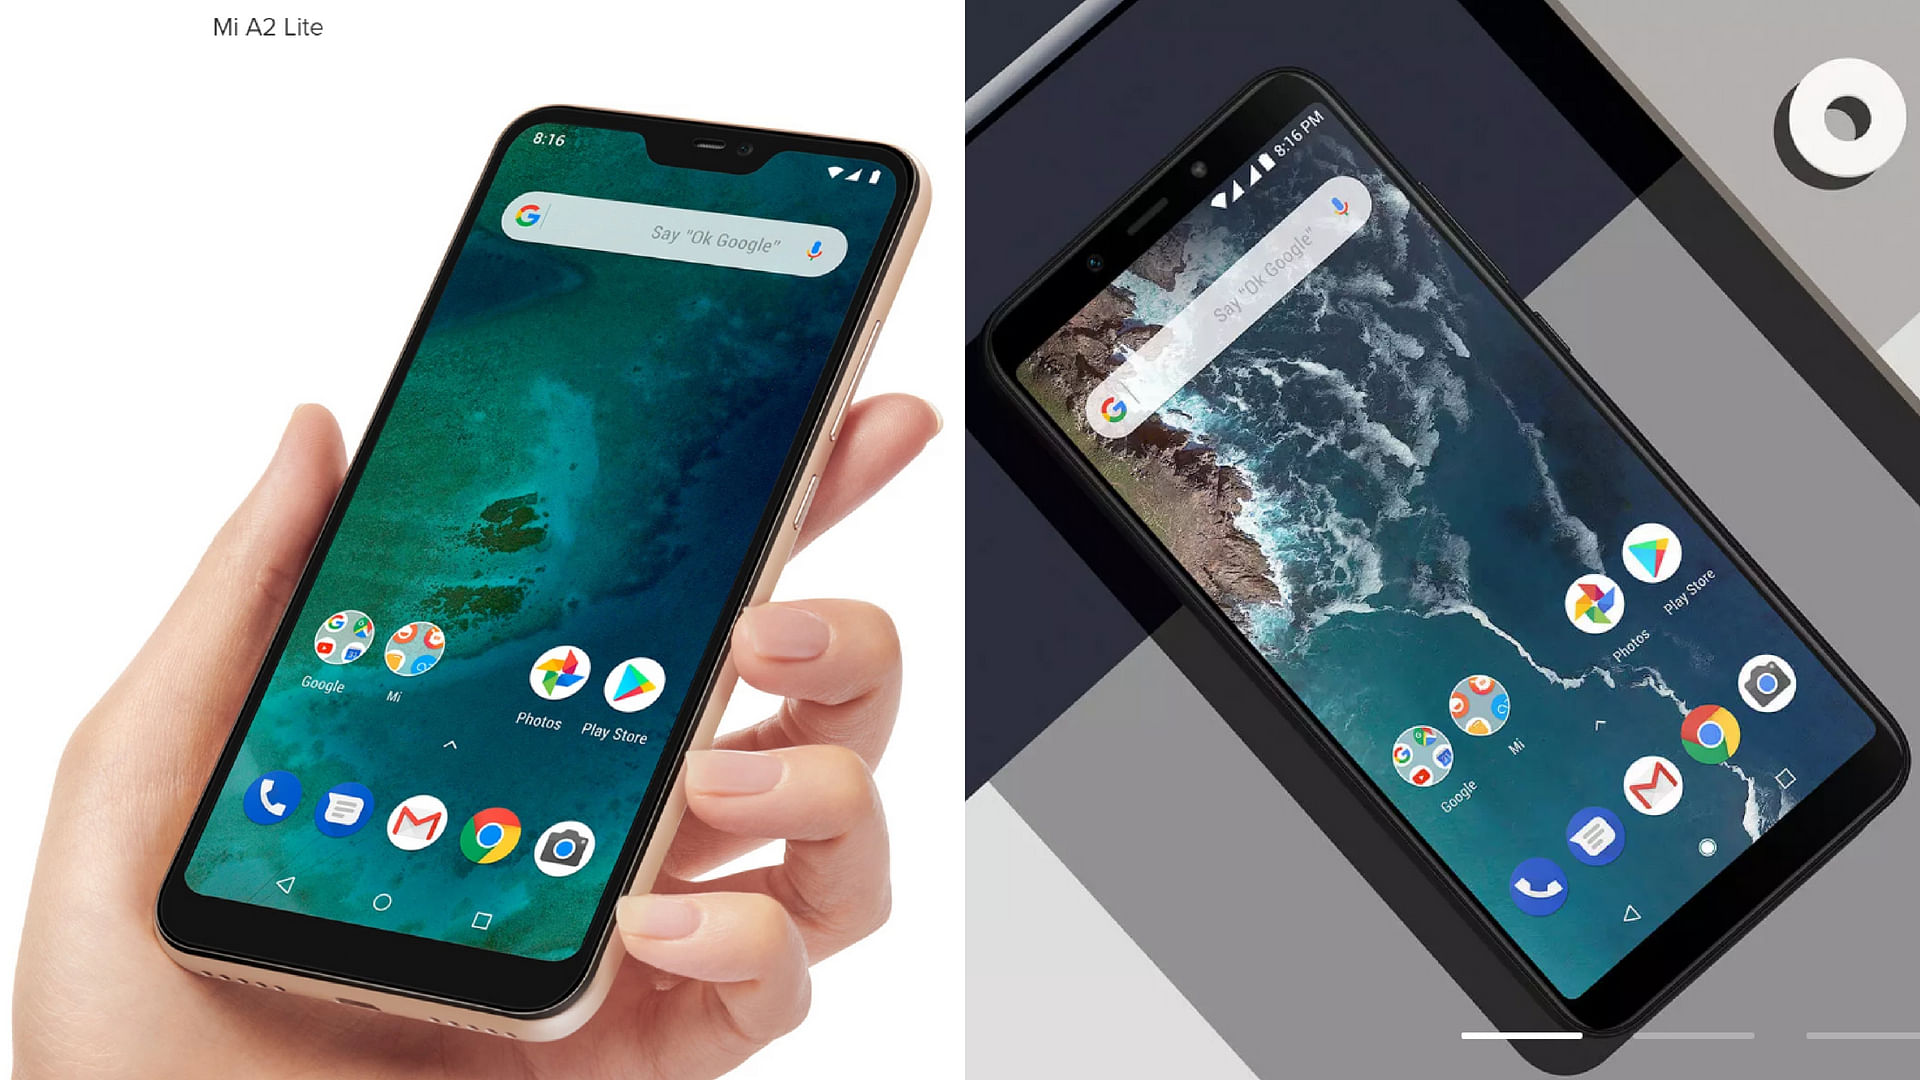 Chinese smartphone maker Xiaomi on Tuesday expanded its Android One line-up with Mi A2 and Mi A2 Lite devices that will come to India on 8 August.